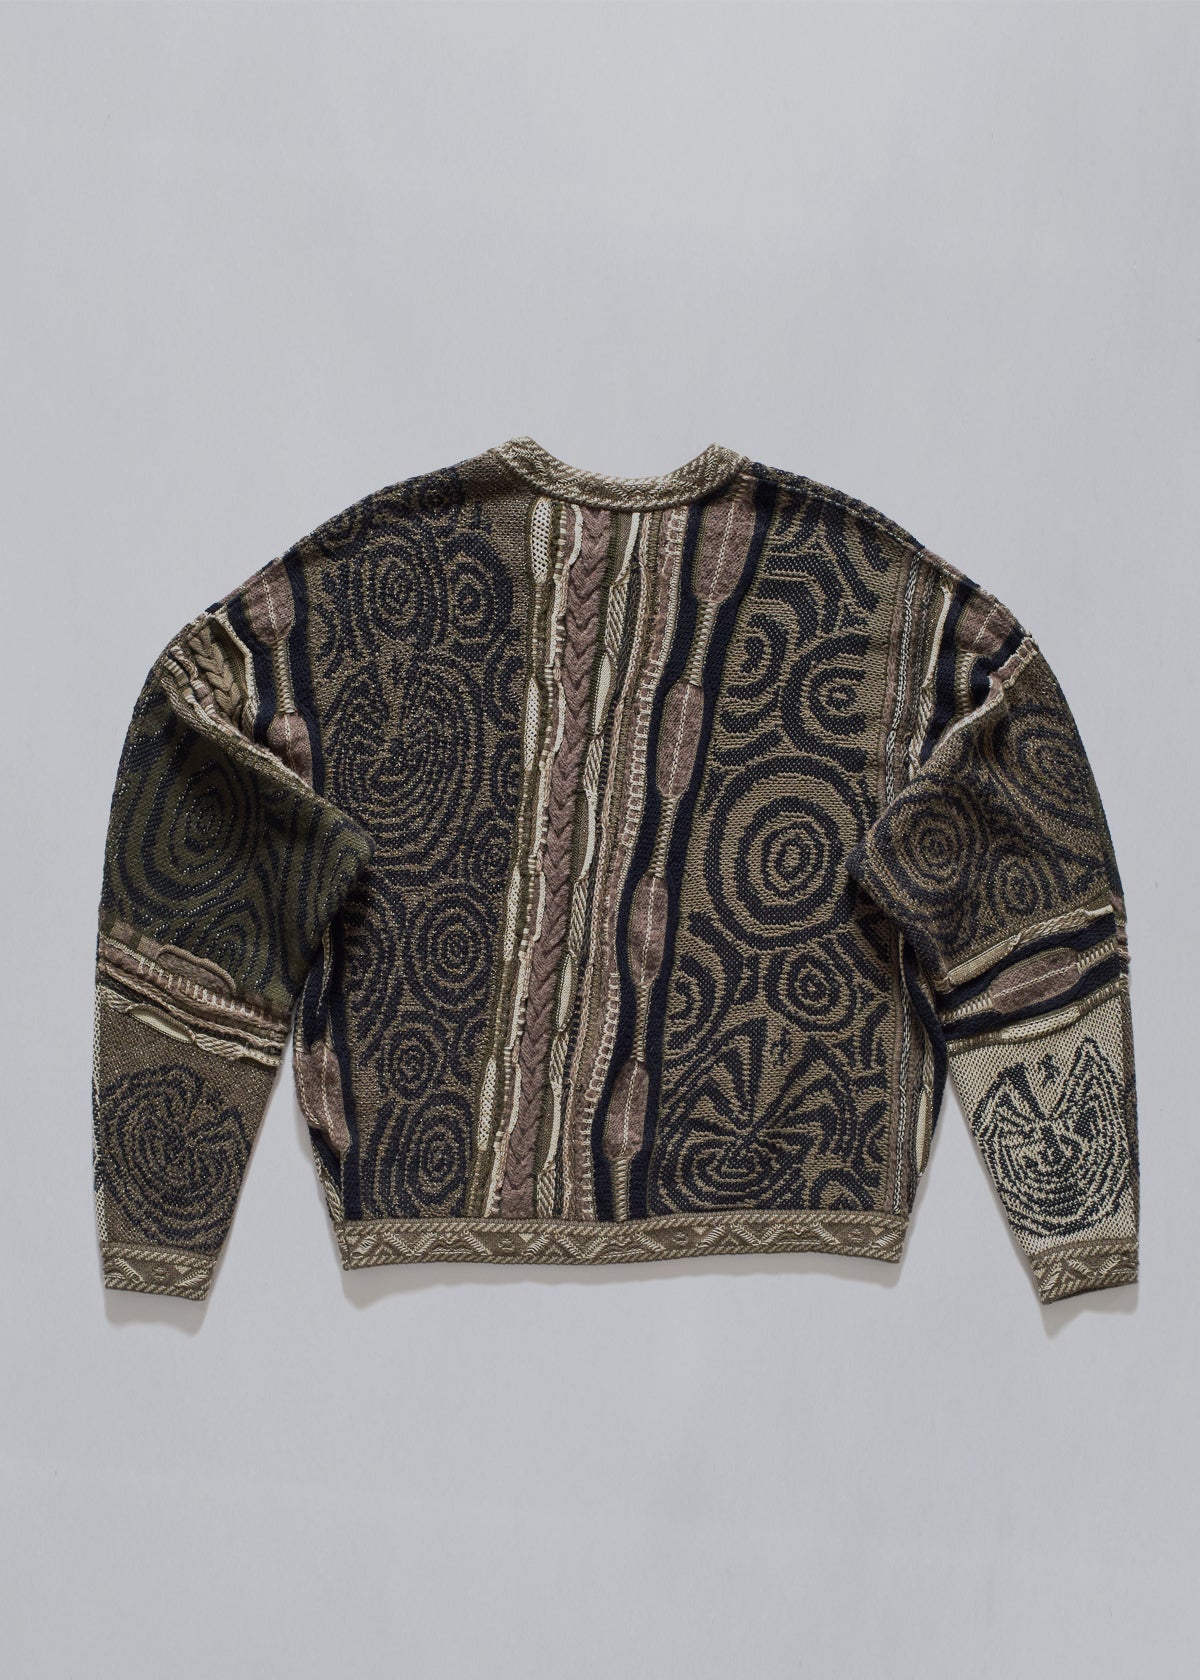 Maze 7G Gaudy Sweater AW2020 - X-Large - The Archivist Store